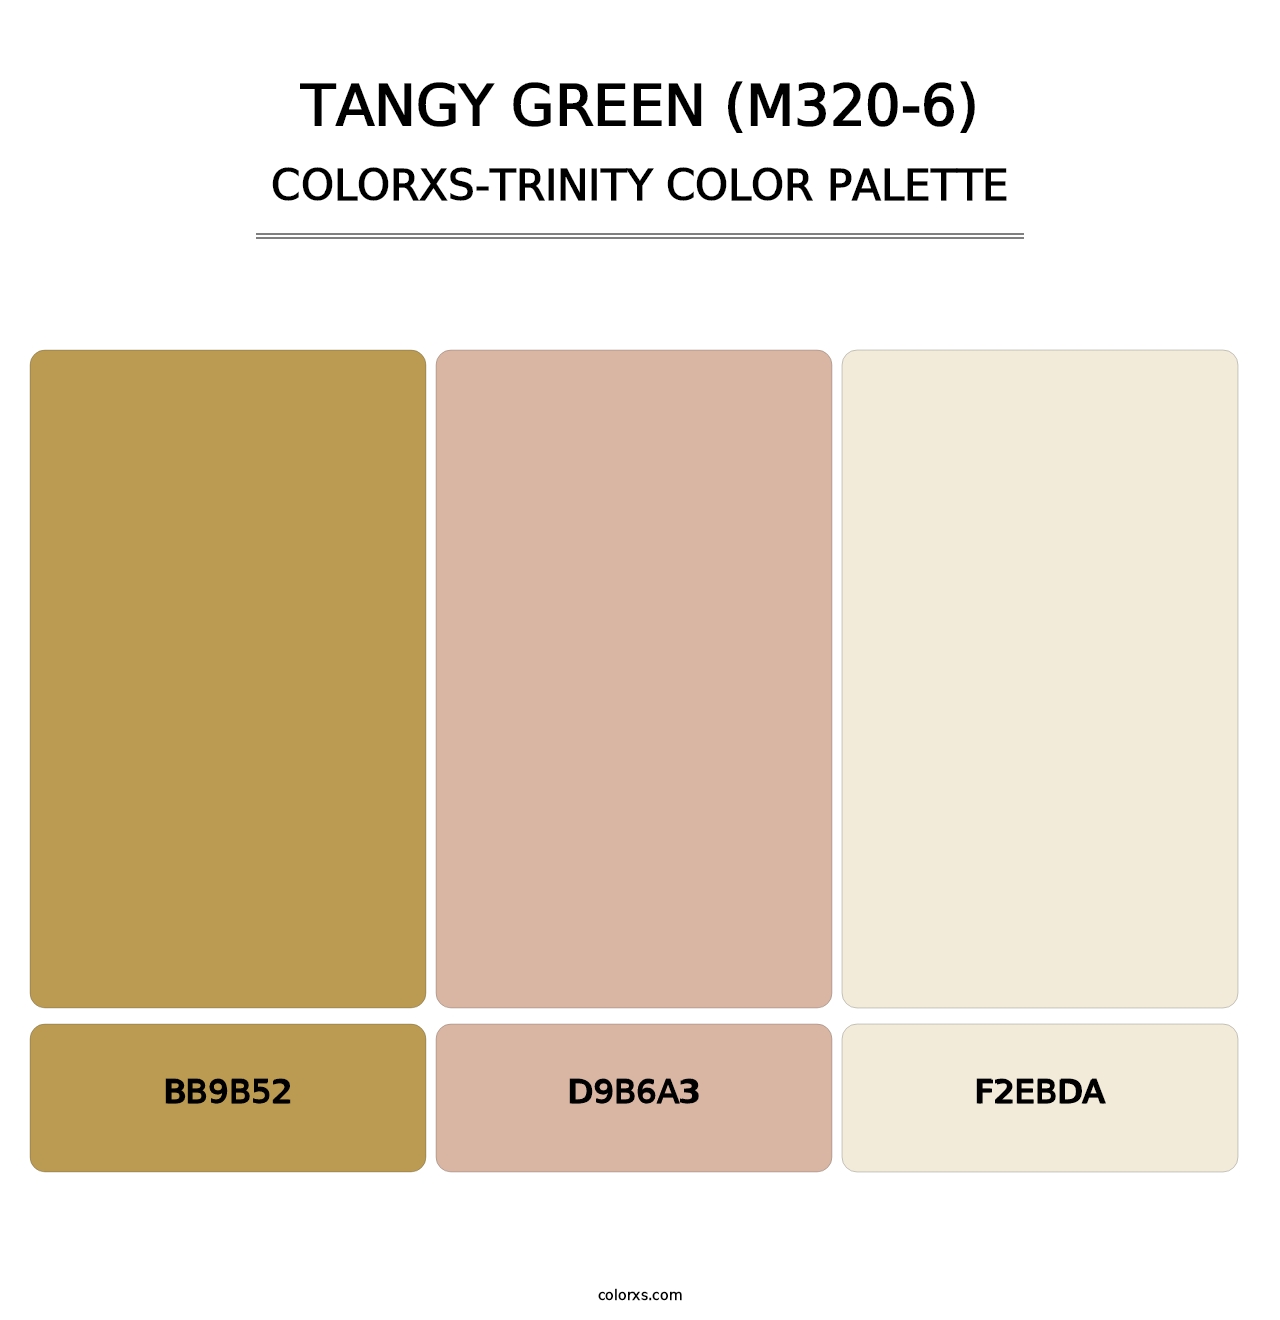 Tangy Green (M320-6) - Colorxs Trinity Palette